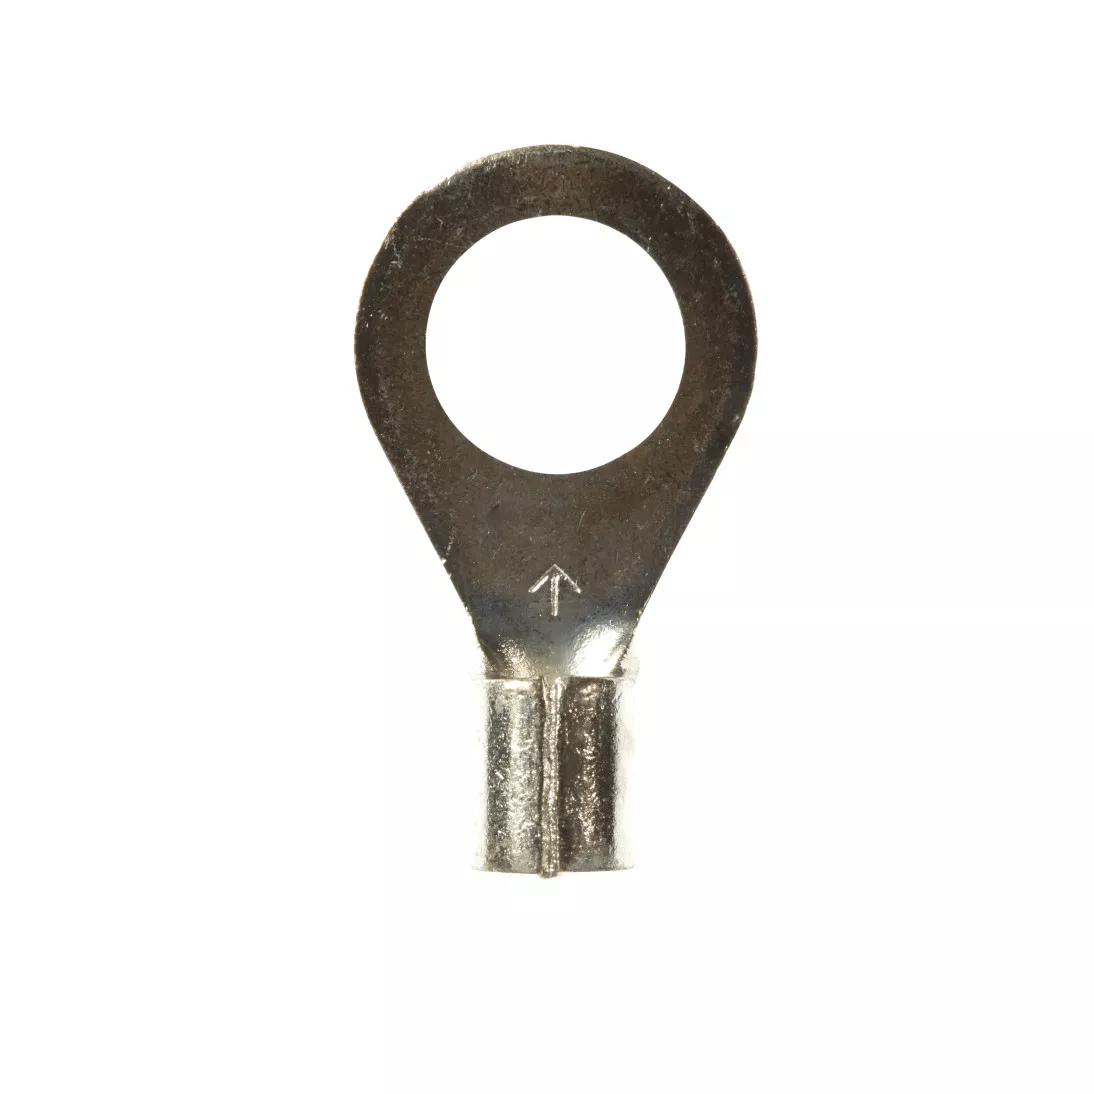 3M™ Scotchlok™ Ring Non-Insulated, 100/bottle, M10-516R/SX,
standard-style ring tongue fits around the stud, 500/Case